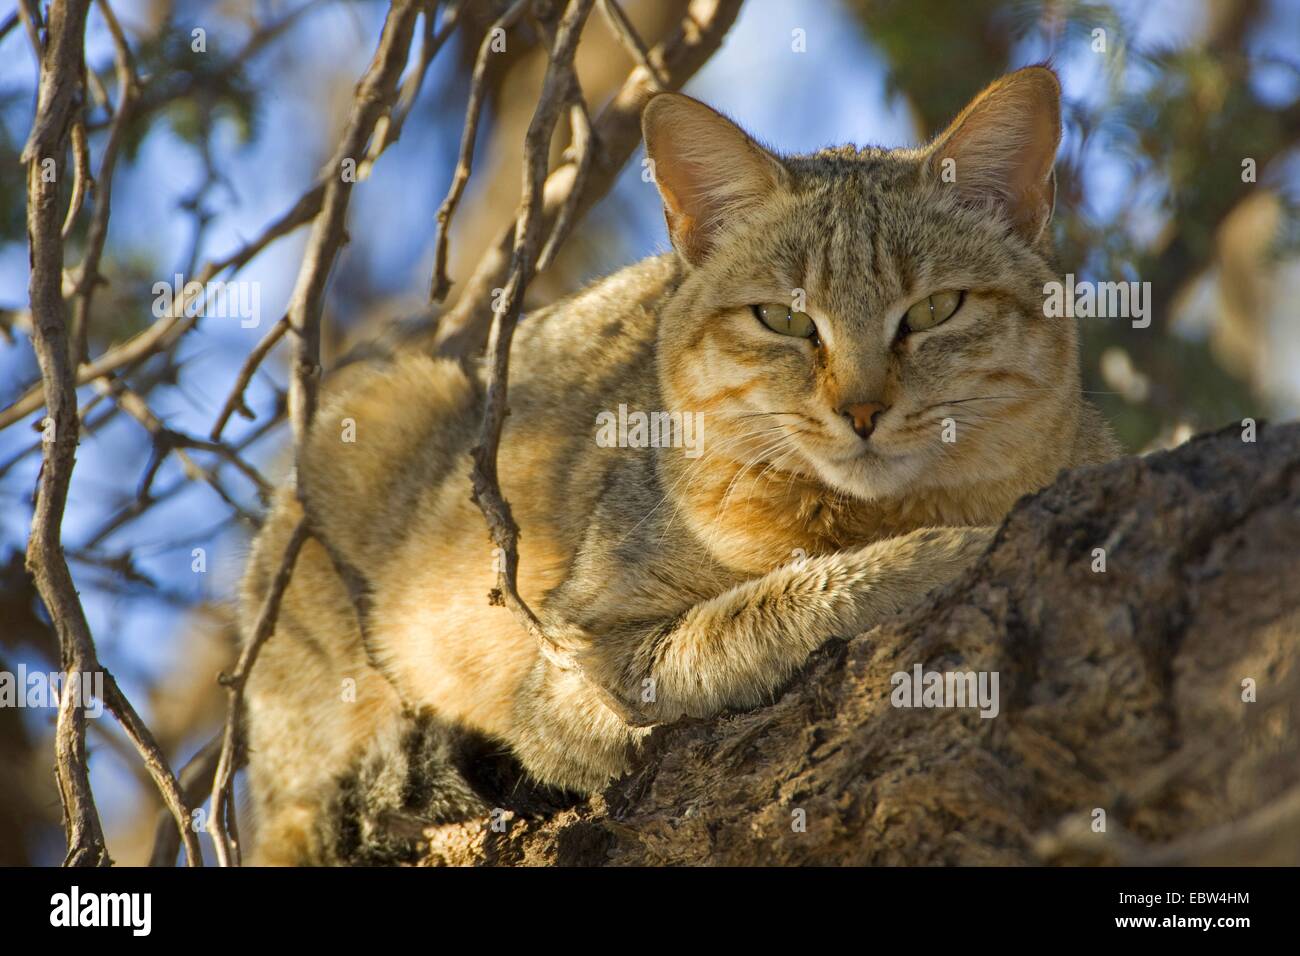 African wildcat (Felis lybica, Felis libyca, Felis silvestris lybica, Felis silvestris libyca), lying on a branch, South Africa, Northern Cape, Kgalagadi Transfrontier National Park Stock Photo